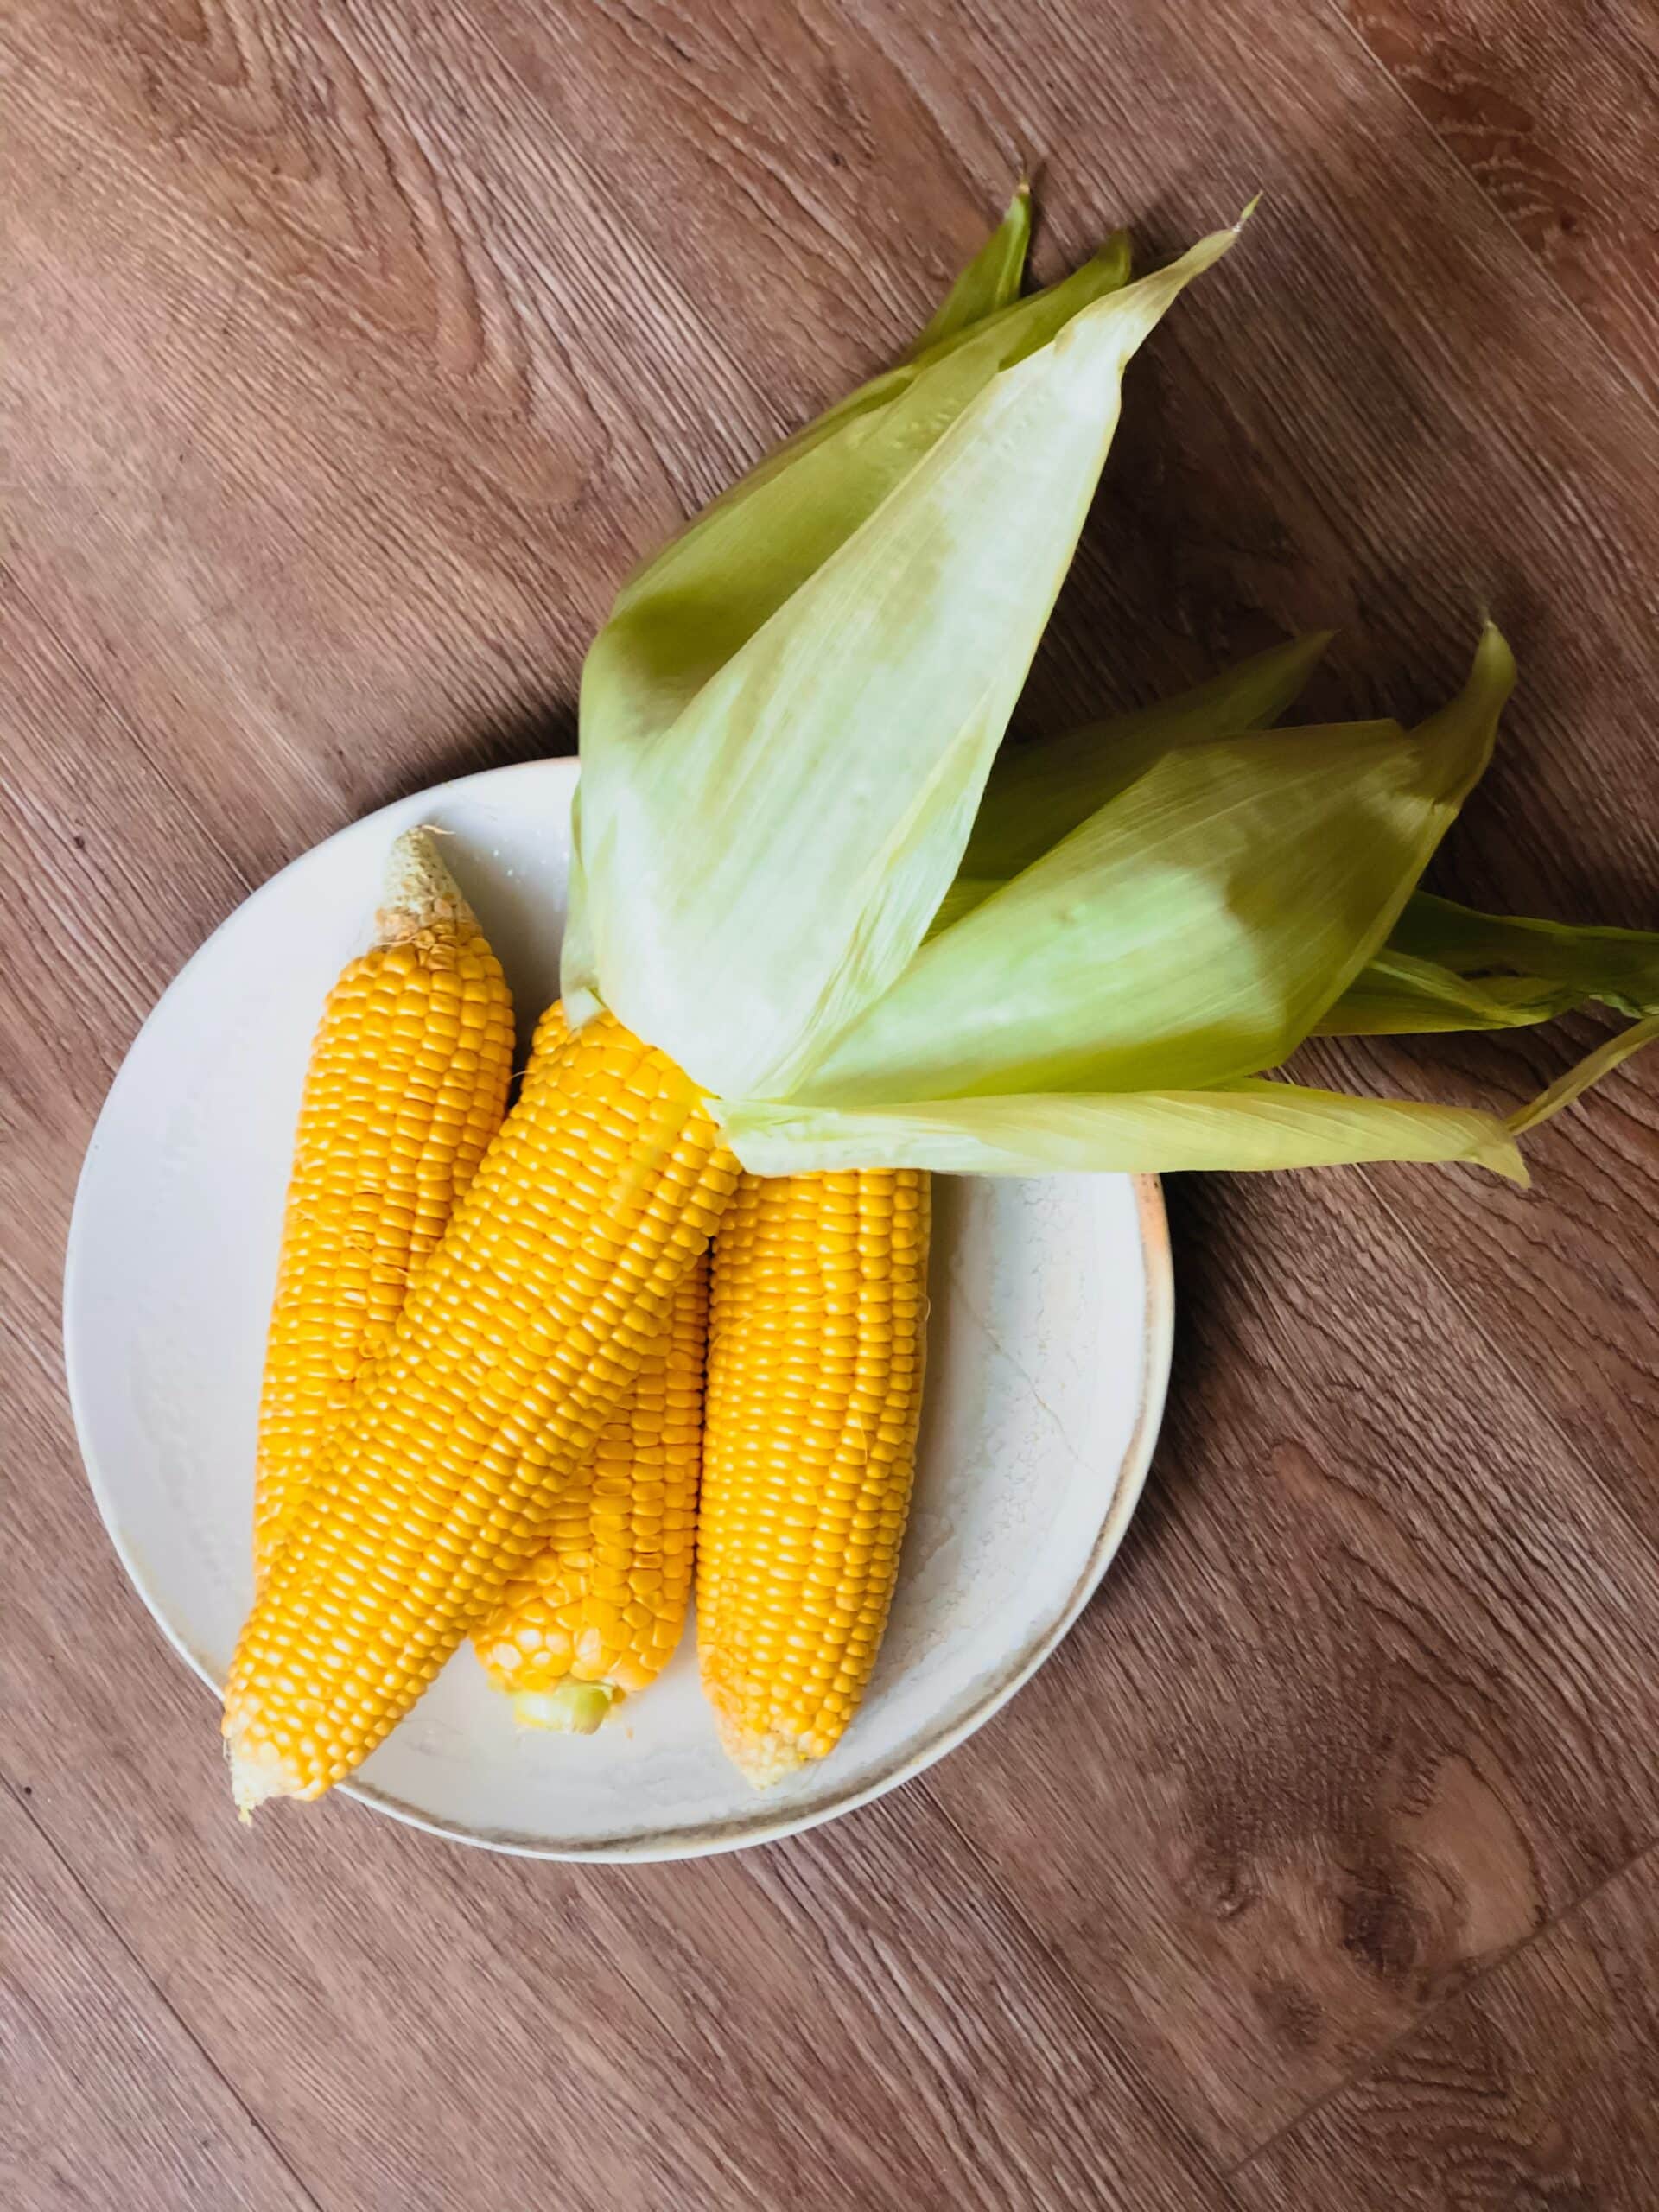 How Long To Cook Sweet Corn